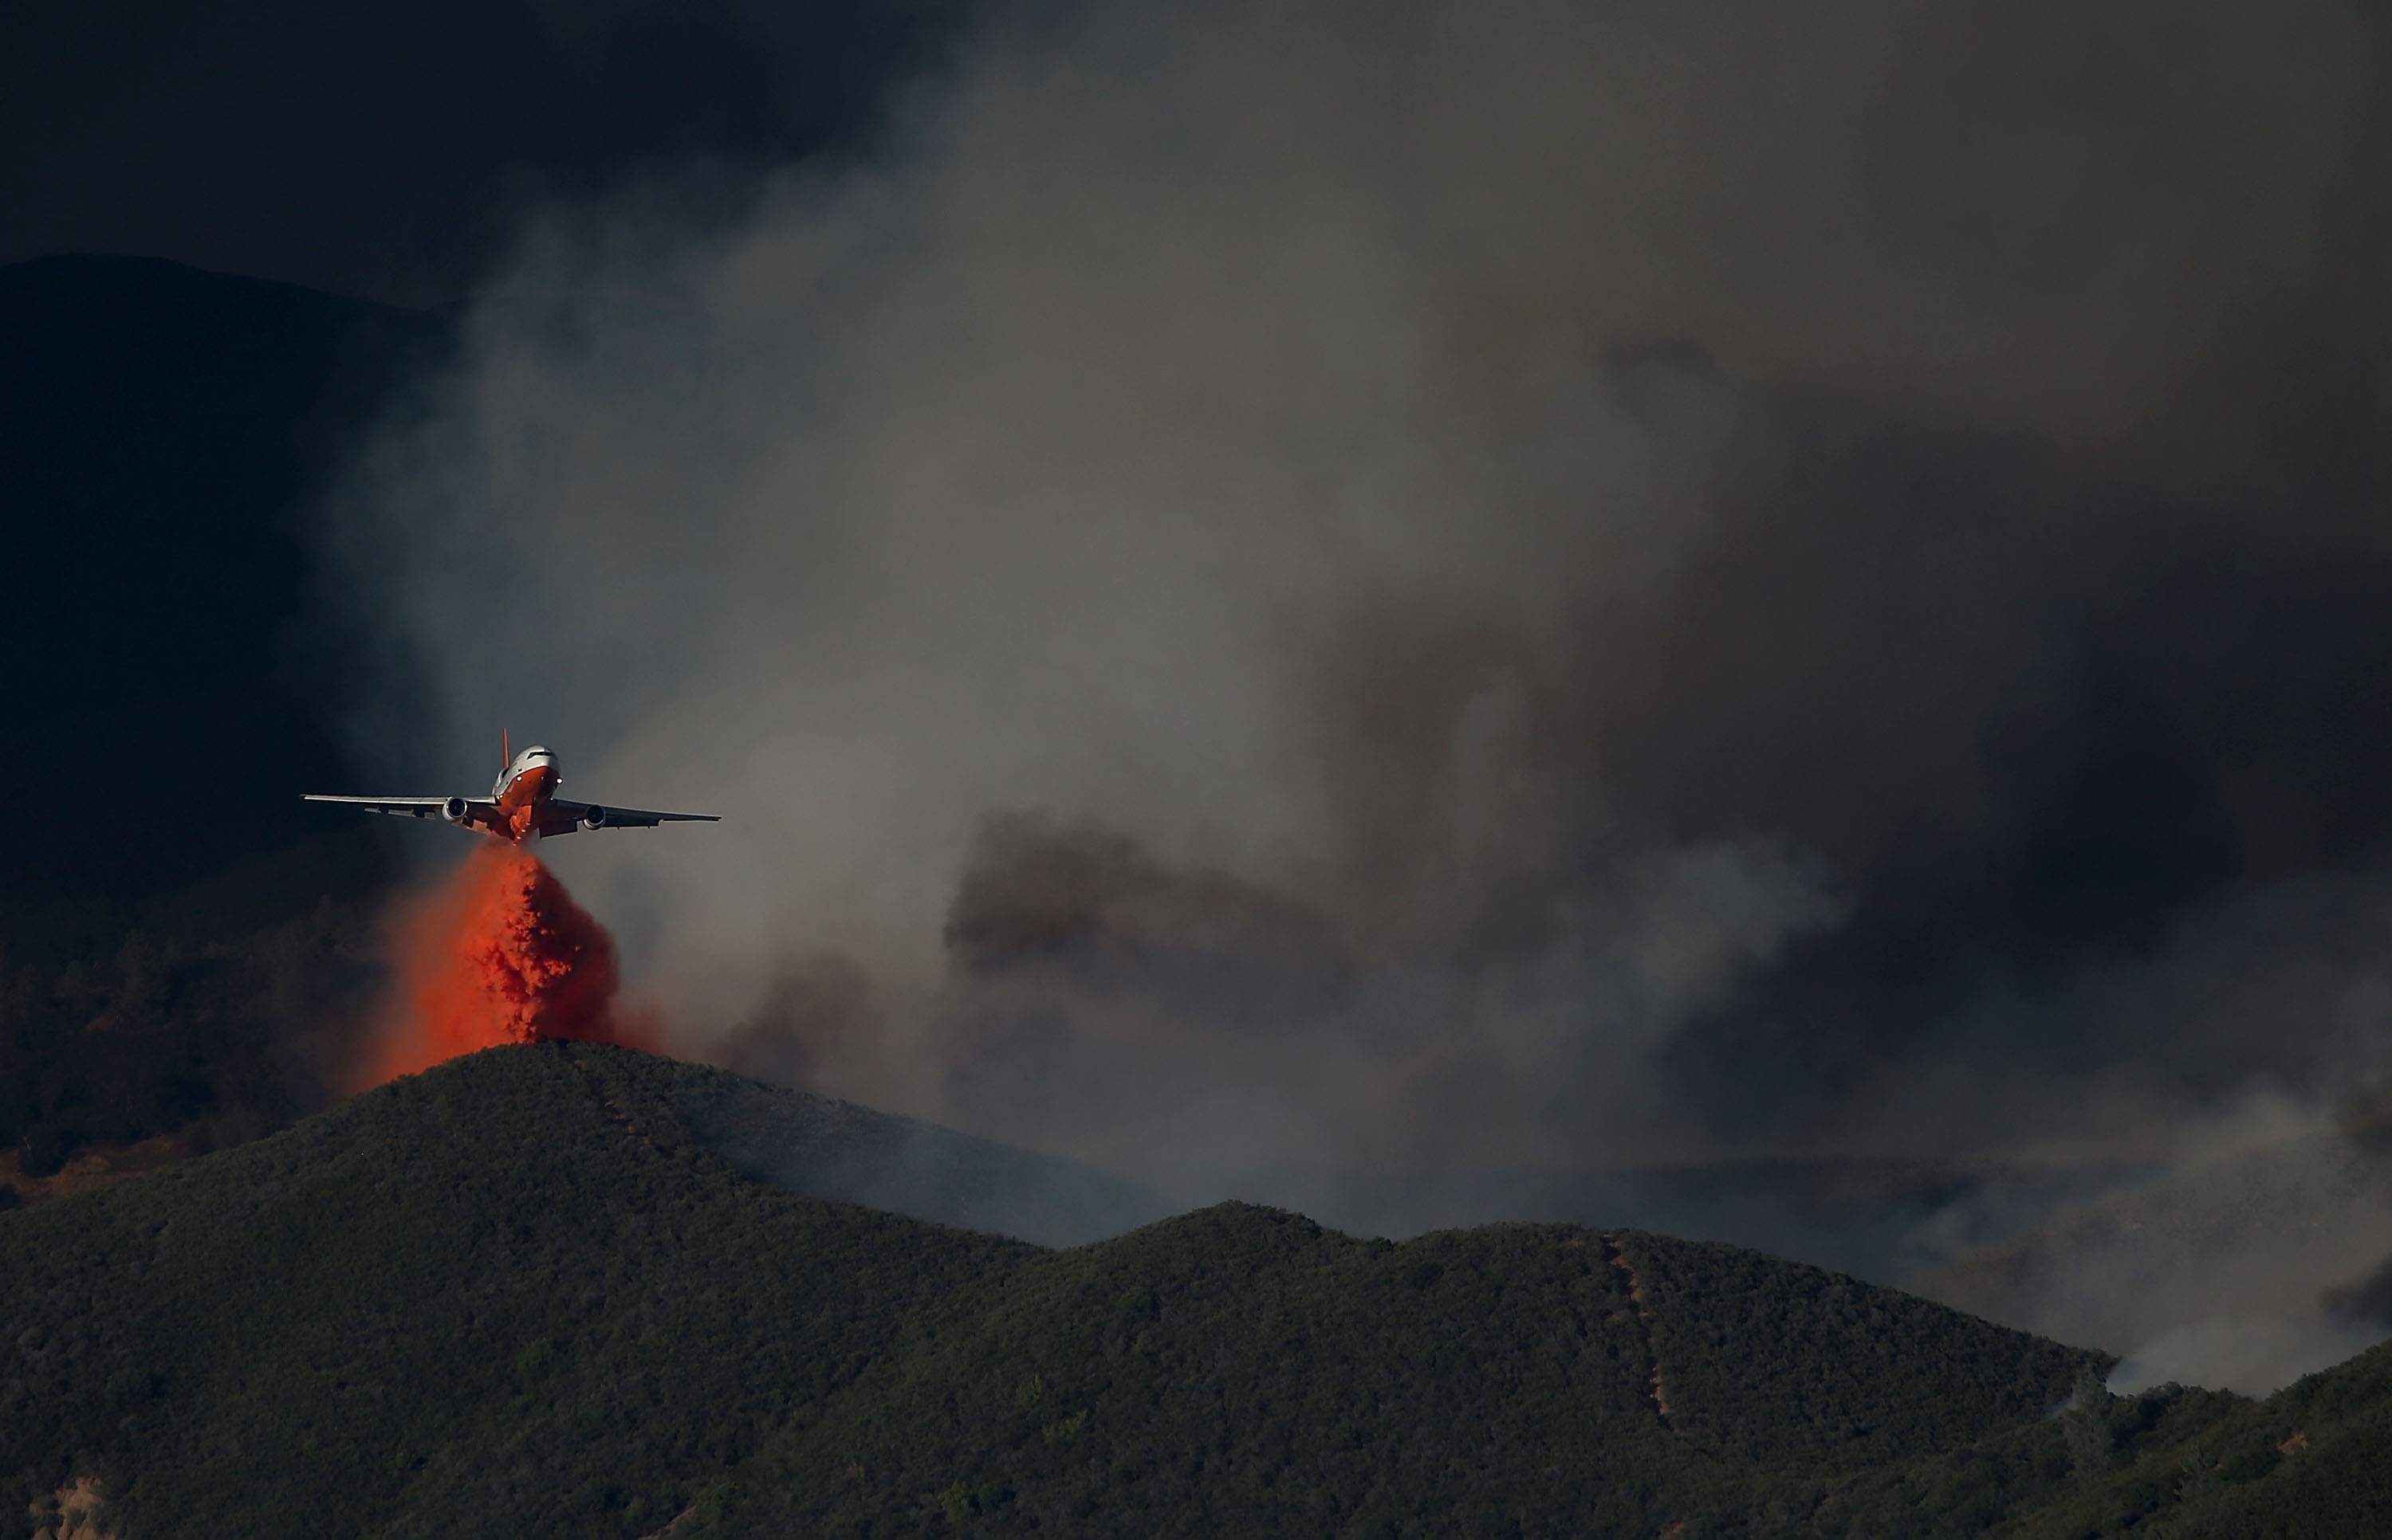 CLEARLAKE, CA - AUGUST 03:  A DC-10 firefighting aircraft drops fire retardant on a ridge in front of the Rocky Fire on August 3, 2015 near Clearlake, California. Nearly 3,000 firefighters are battling the Rocky Fire that has burned over 60,000 acres has forced the evacuation of 12,000 residents in Lake County. The fire is currently 12 percent contained and has destroyed at least 14 homes. 6,300 homes are threatened by the fast moving  blaze.  (Photo by Justin Sullivan/Getty Images) *** BESTPIX ***